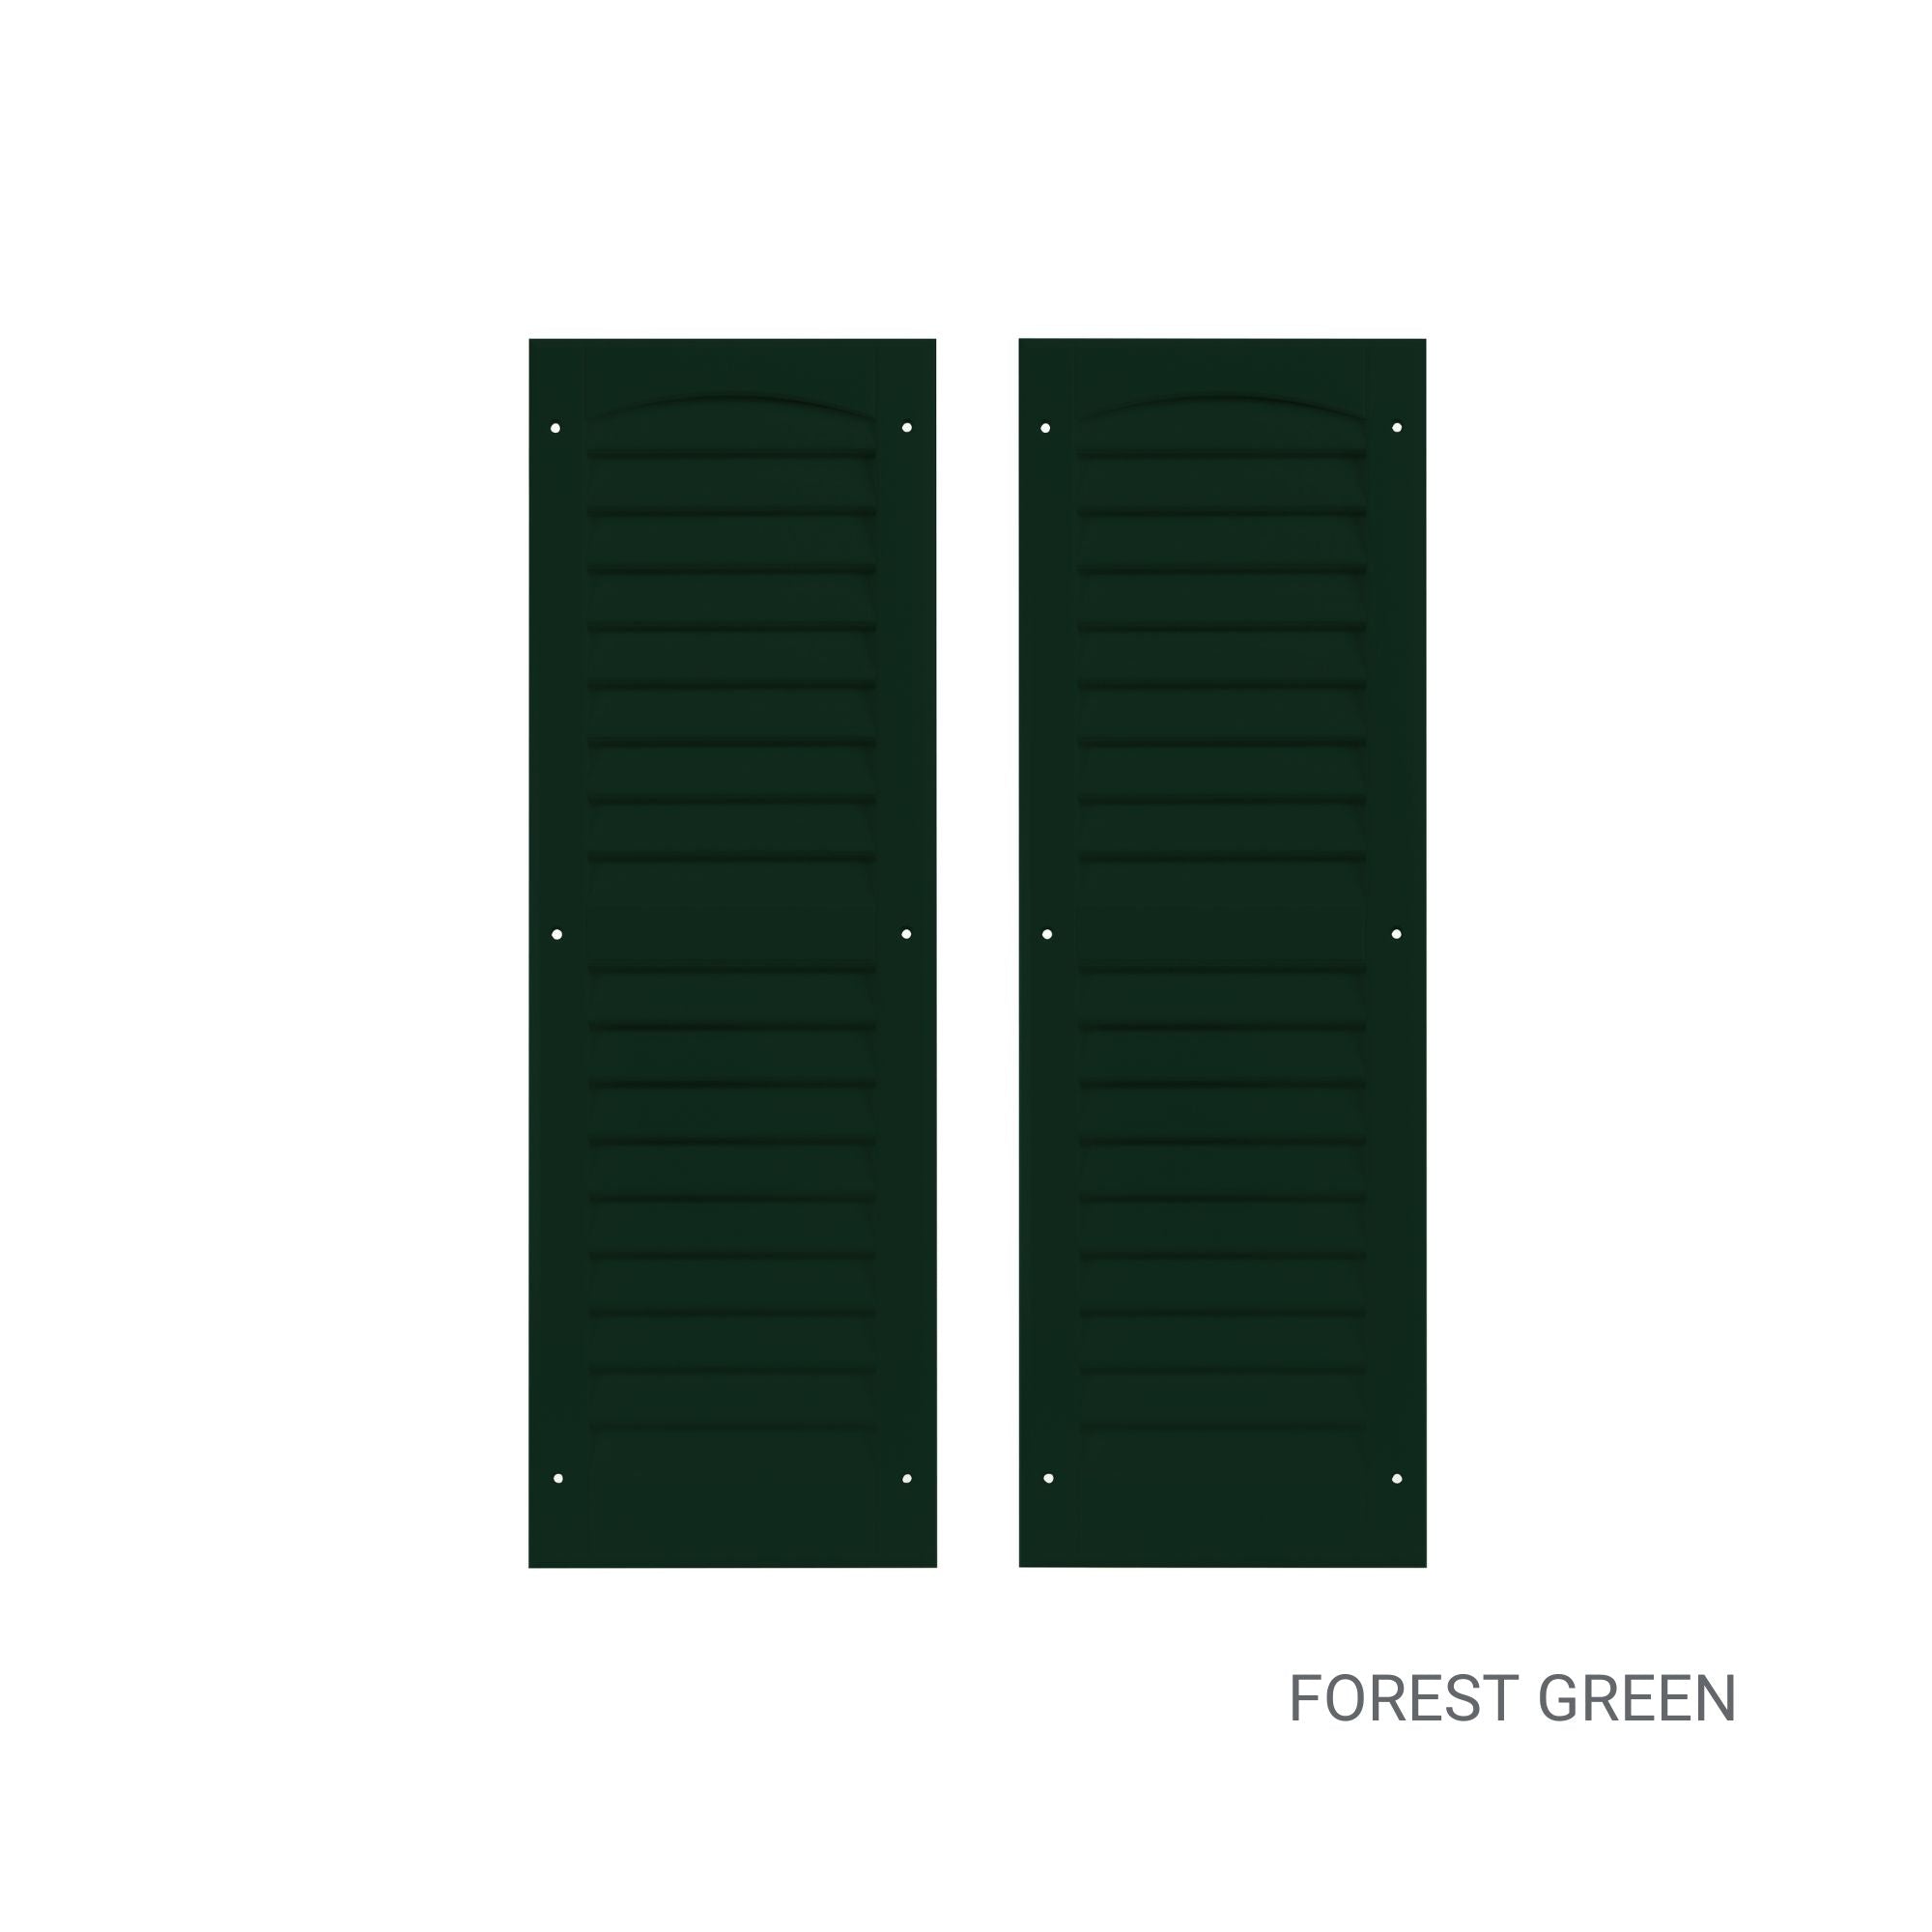 Pair of 9" W x 27" H Louvered Forest Green Shutters for Sheds, Playhouses, and MORE